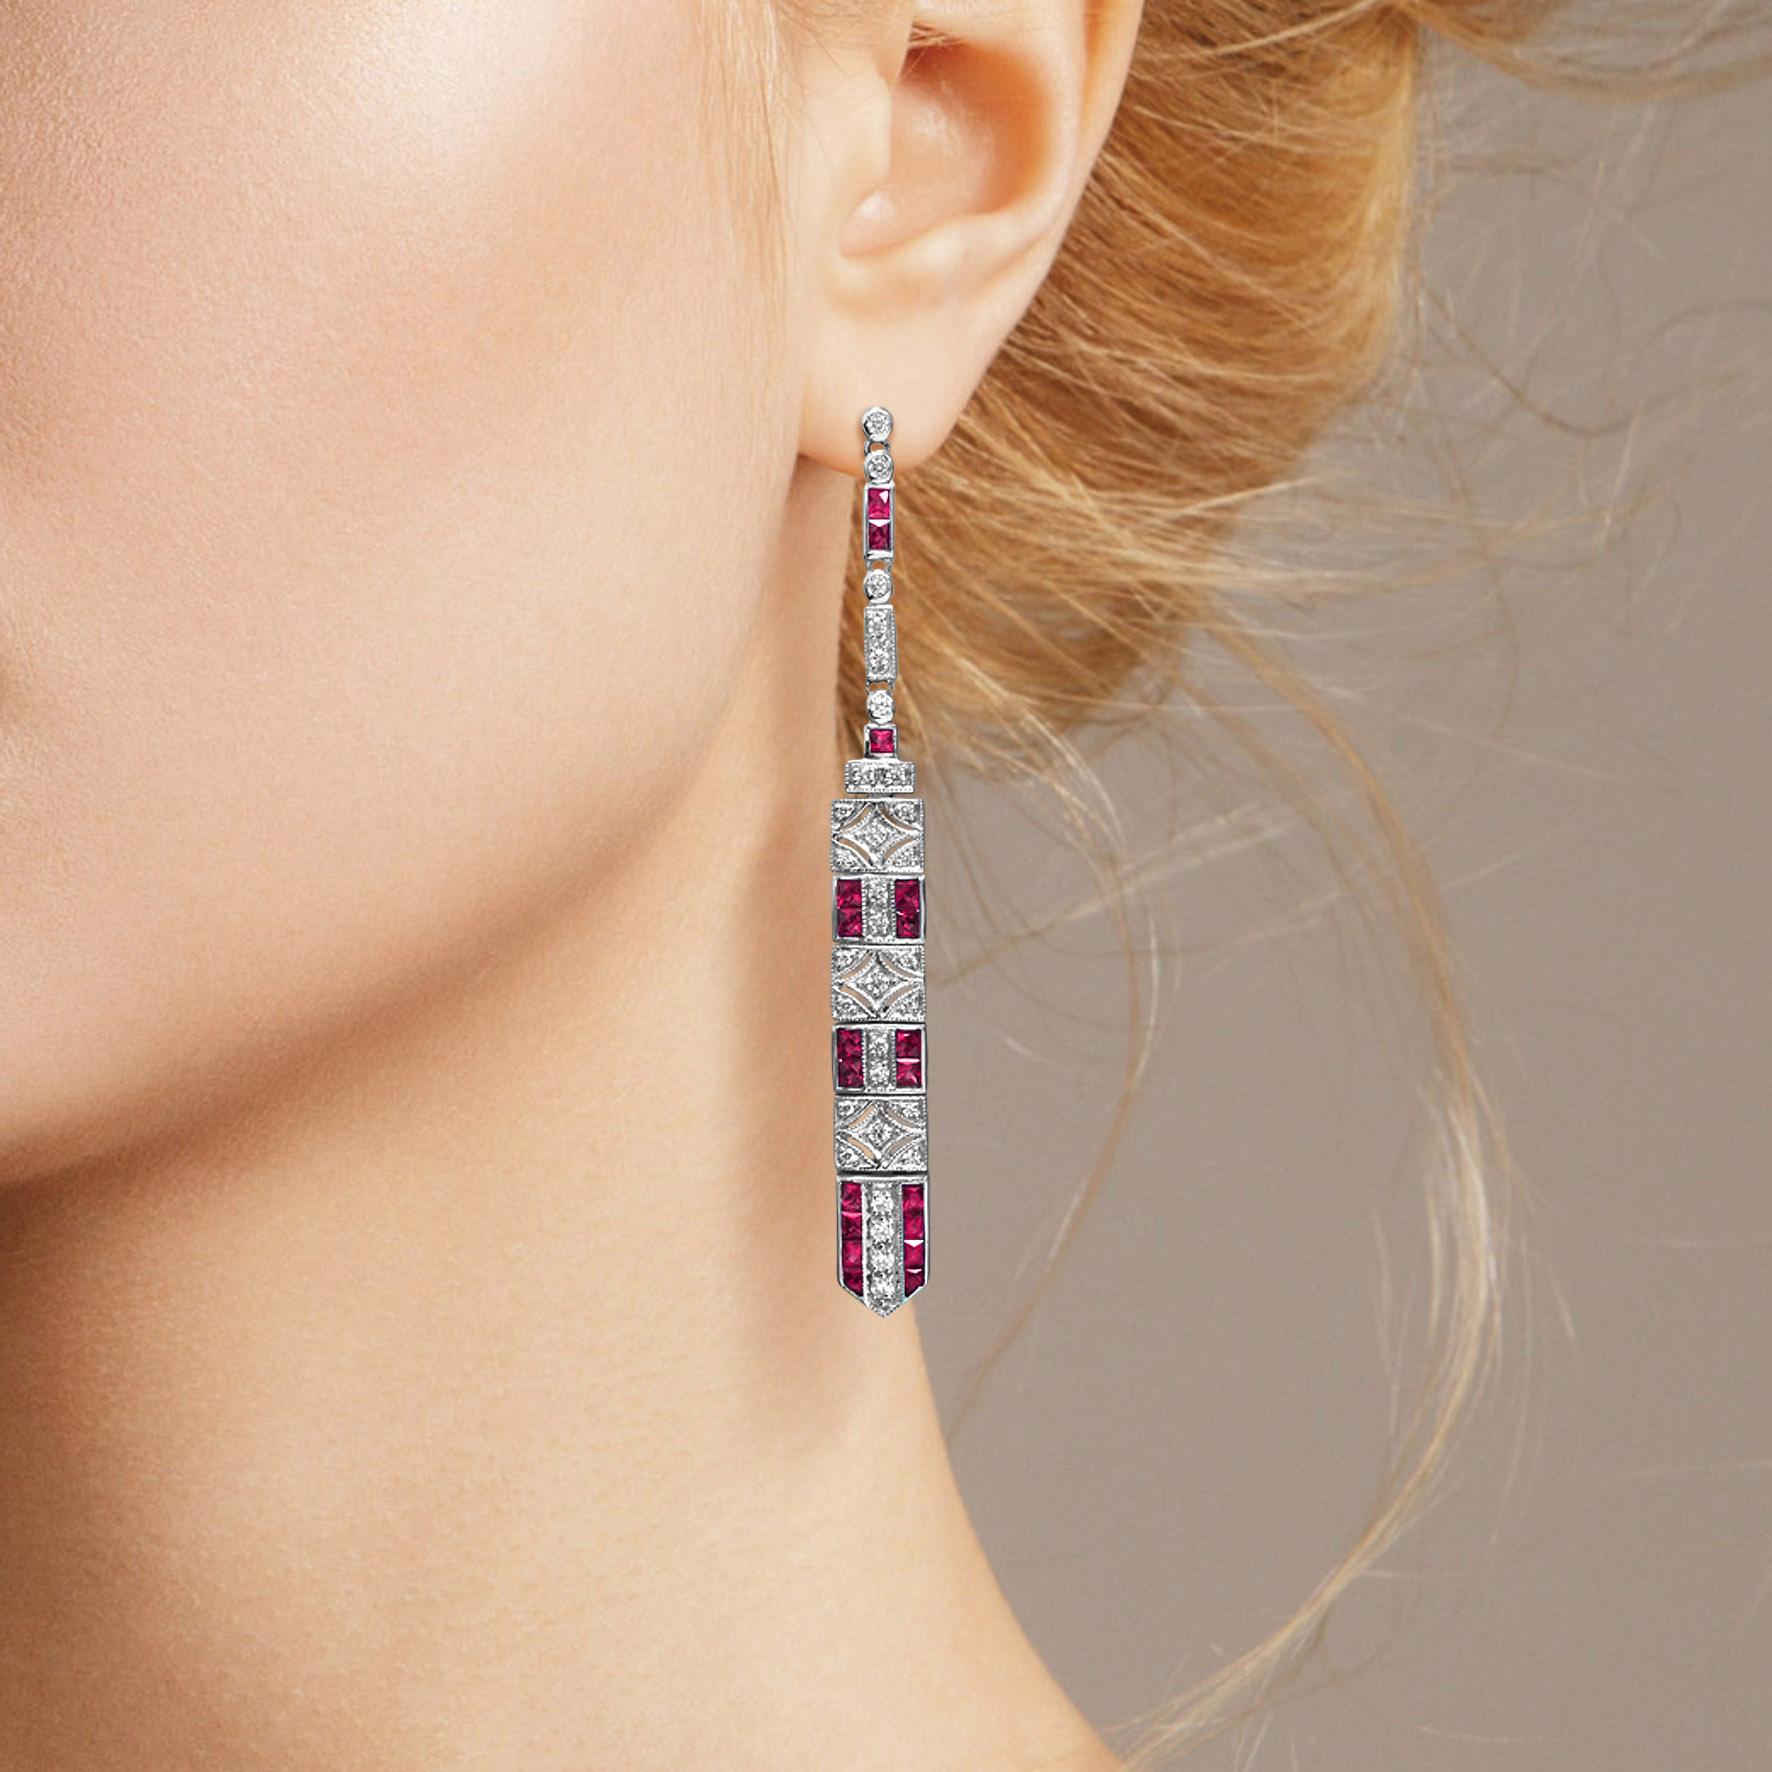 These art deco bar dangle earrings are the epitome of vintage-inspired elegance featuring mesmerizing geometric patterns feature with ruby and diamonds.

Information
Metal: 14K White Gold
Width: 6 mm.
Length: 62 mm.
Weight: 7.90 g. (approx. total